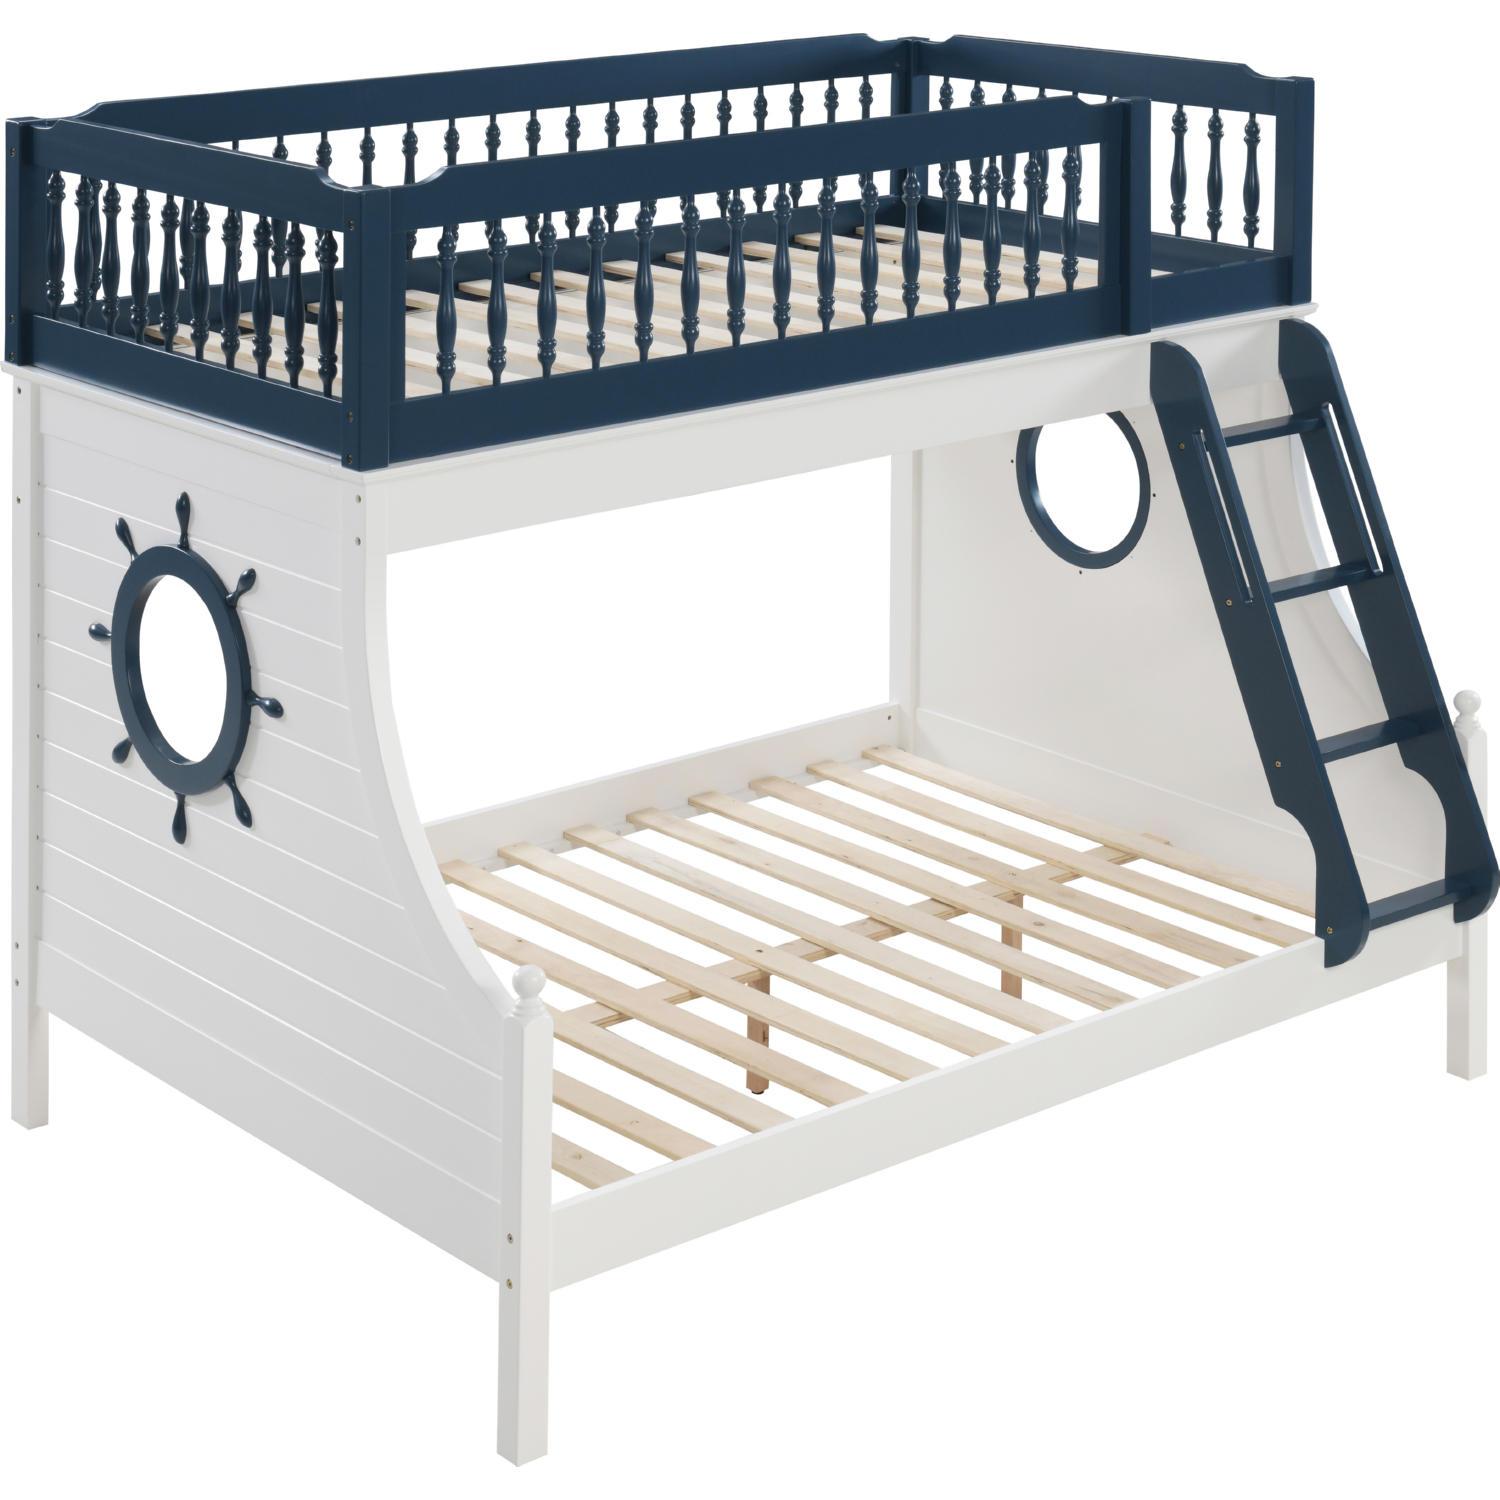 Transitional Twin/Full Bunk Bed Farah BD00864 in Blue 